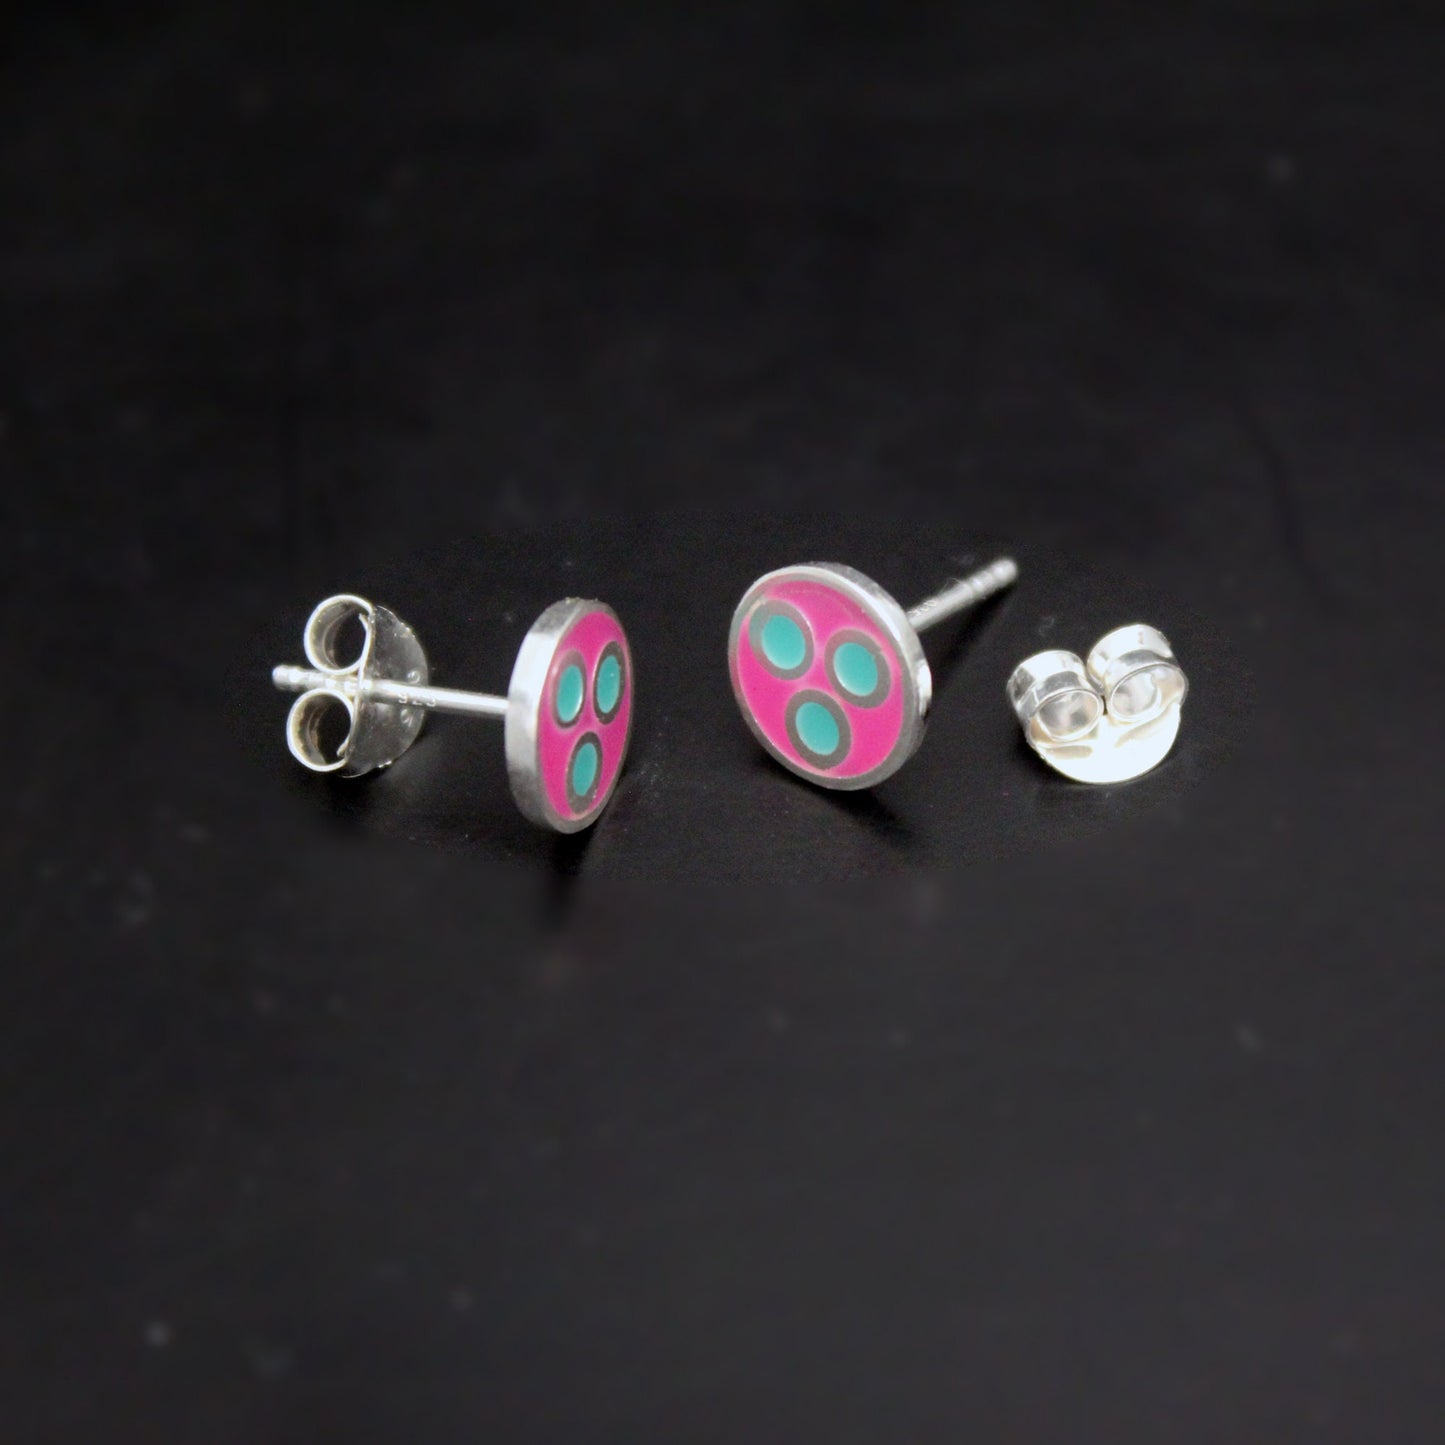 Small colored earrings in 925 silver